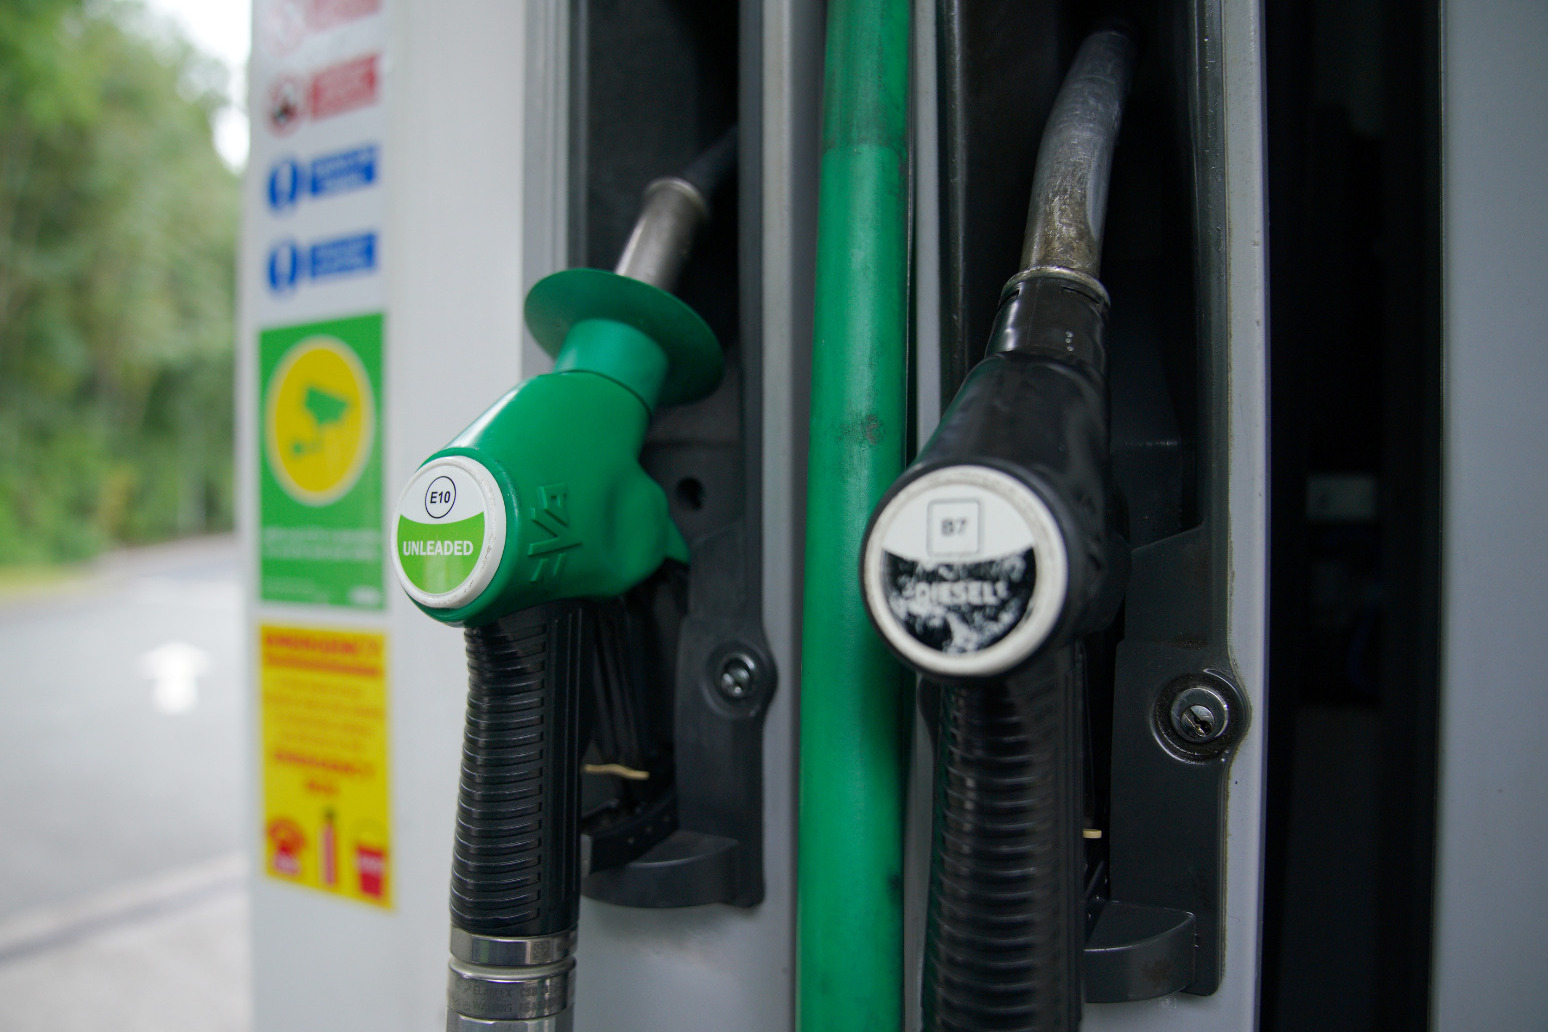 Diesel hits record high price of 147.94p a litre 